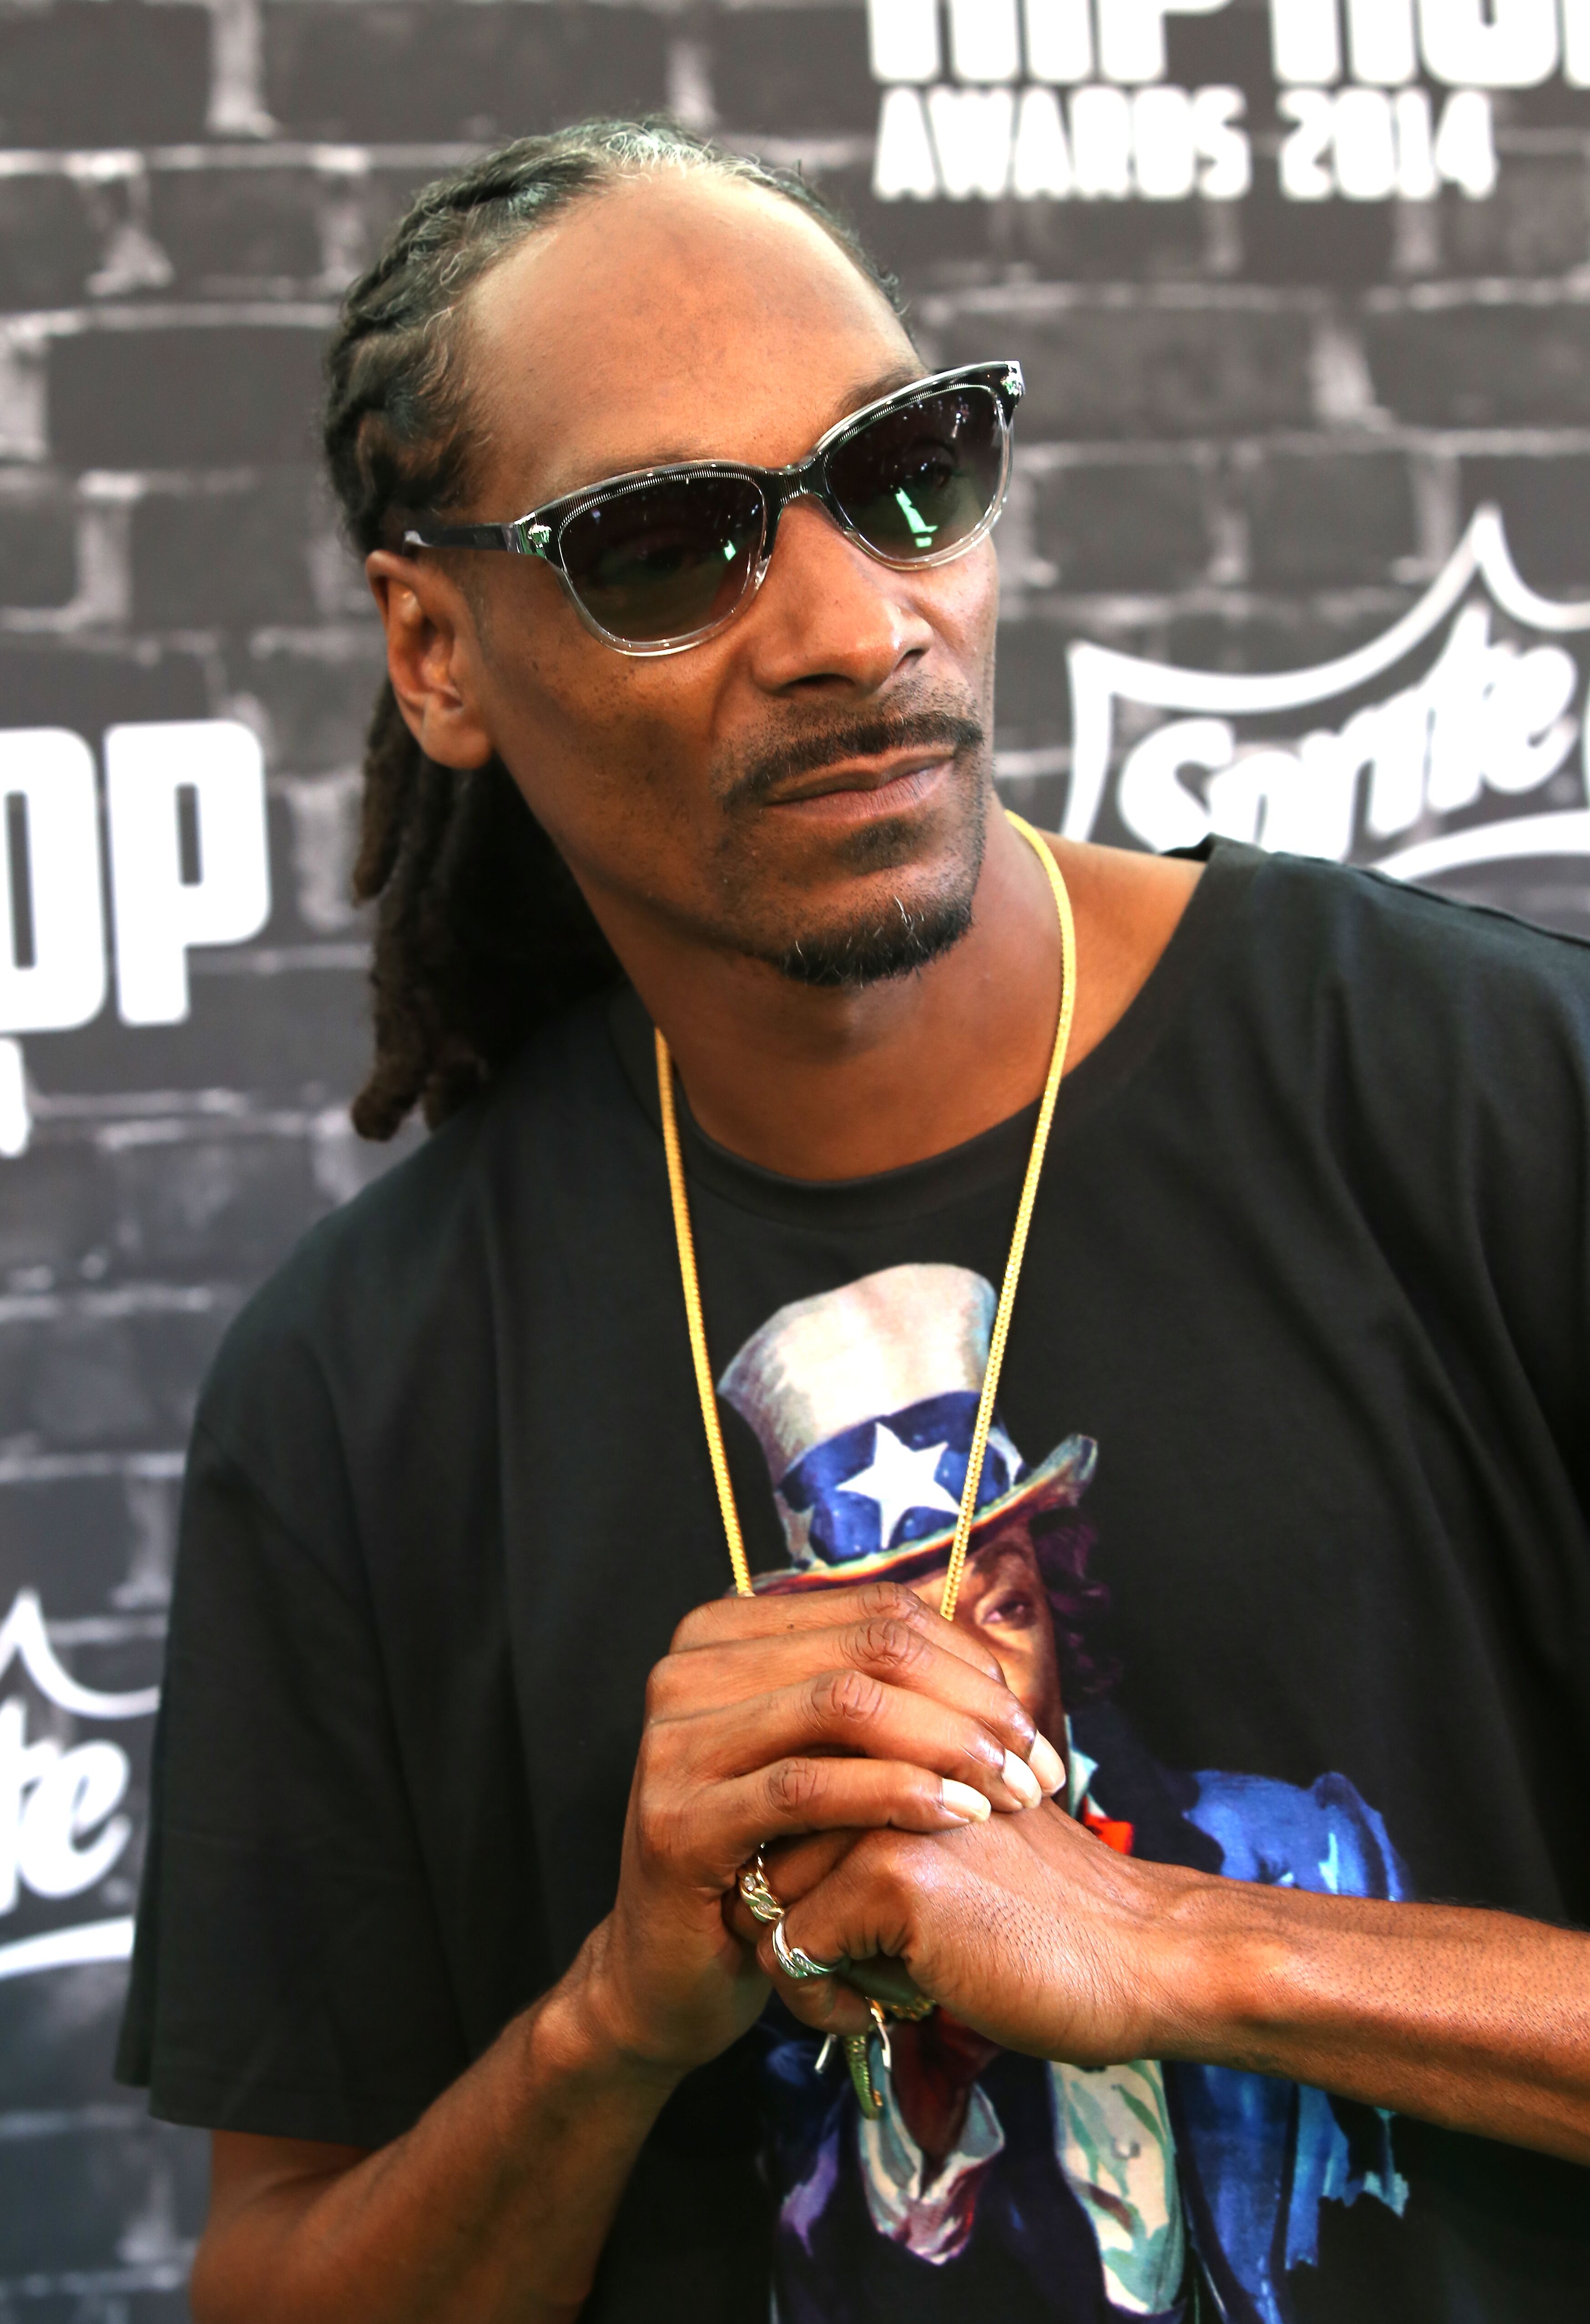 Rapper Uncle Snoop attends the BET Hip Hop Awards 2014 presented by Sprite at Boisfeuillet Jones Atlanta Civic Center on September 20, 2014 | Photo: Getty Images